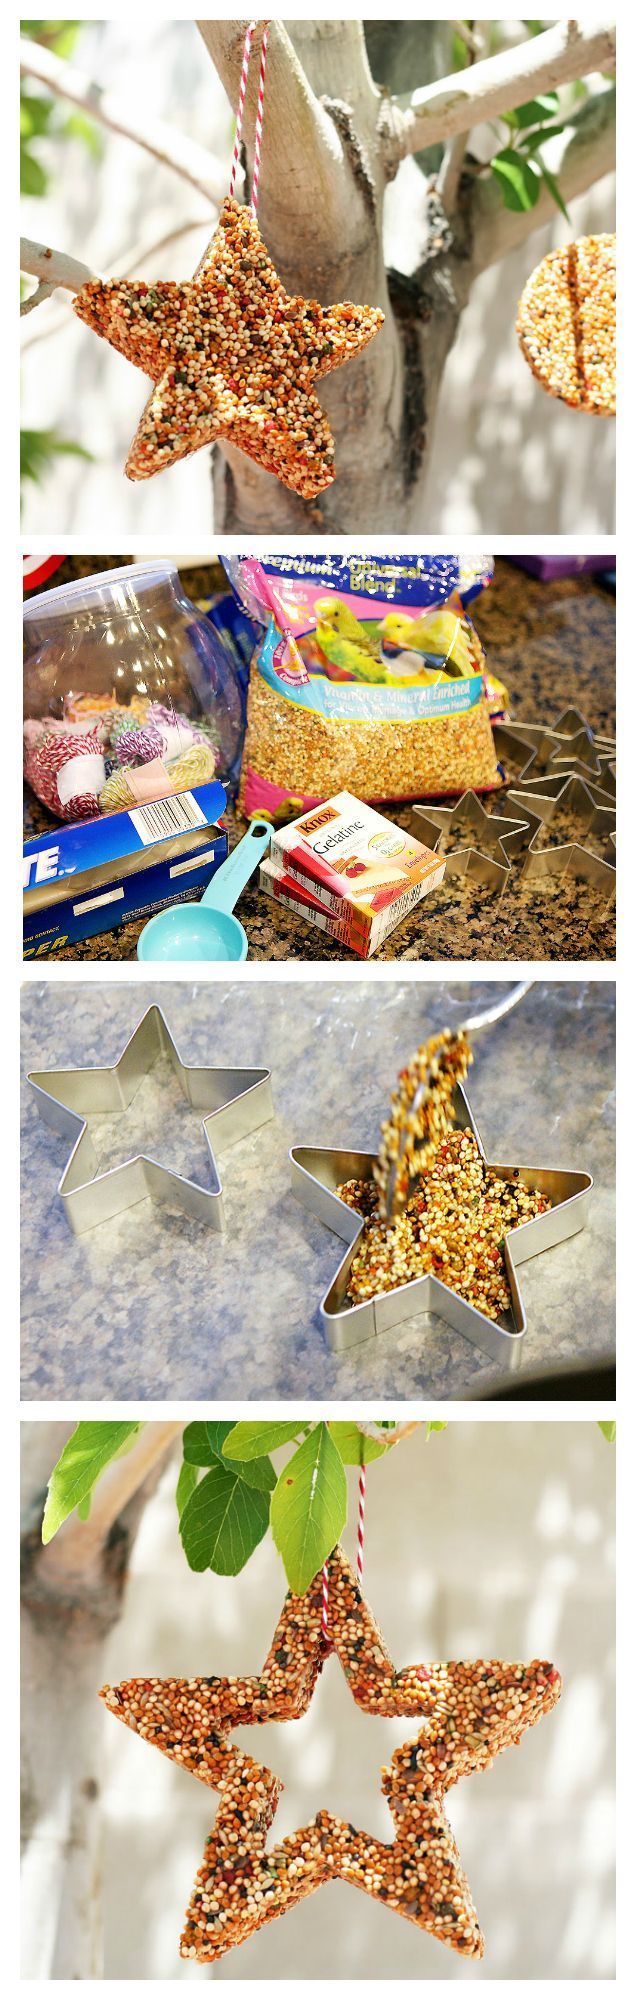 Bird Feeders That Are Fun For All Ages To Make | Eighteen25